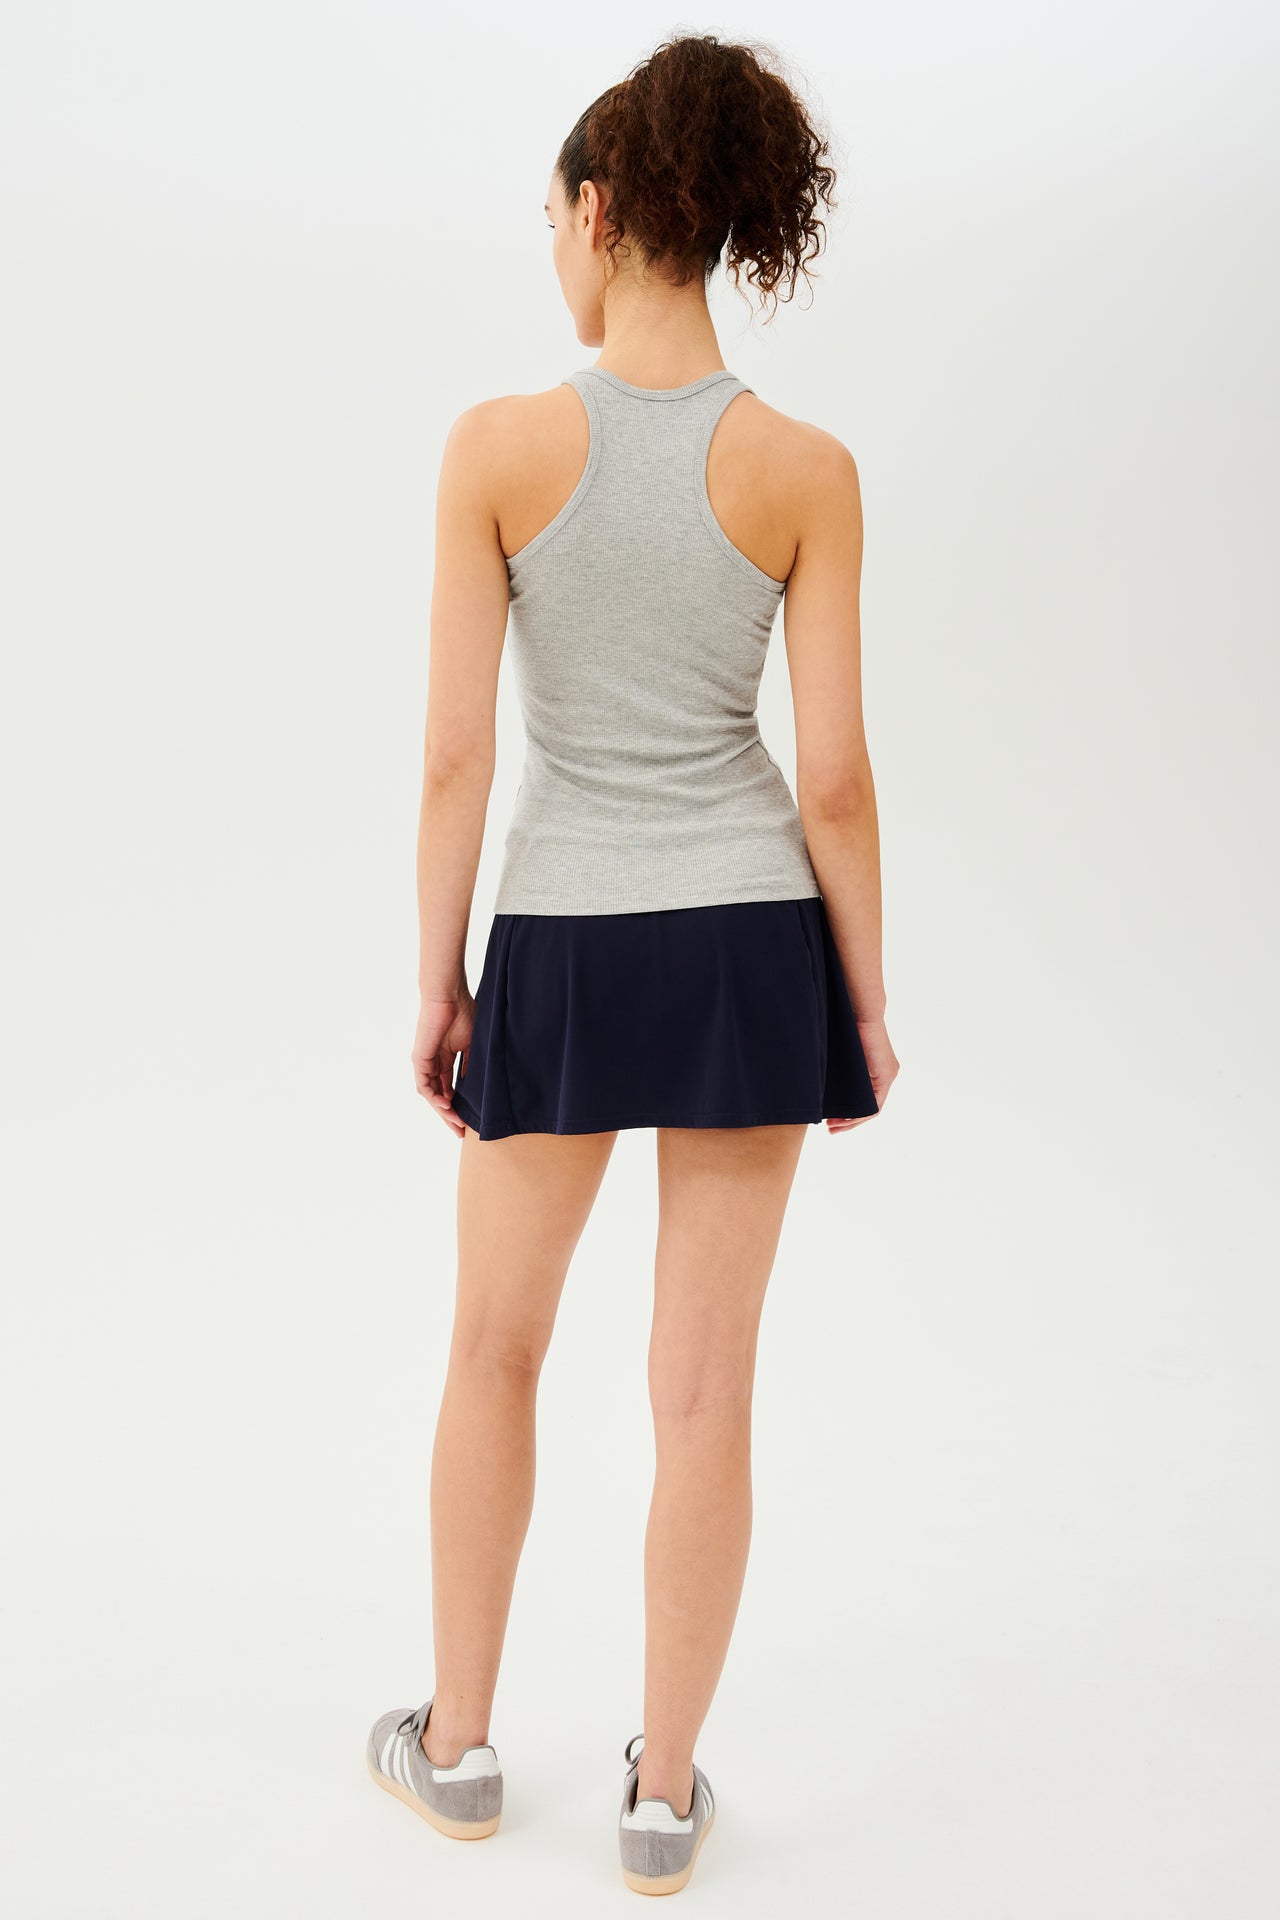 Full back view of girl wearing a light grey tank top and black skirt with grey shoes